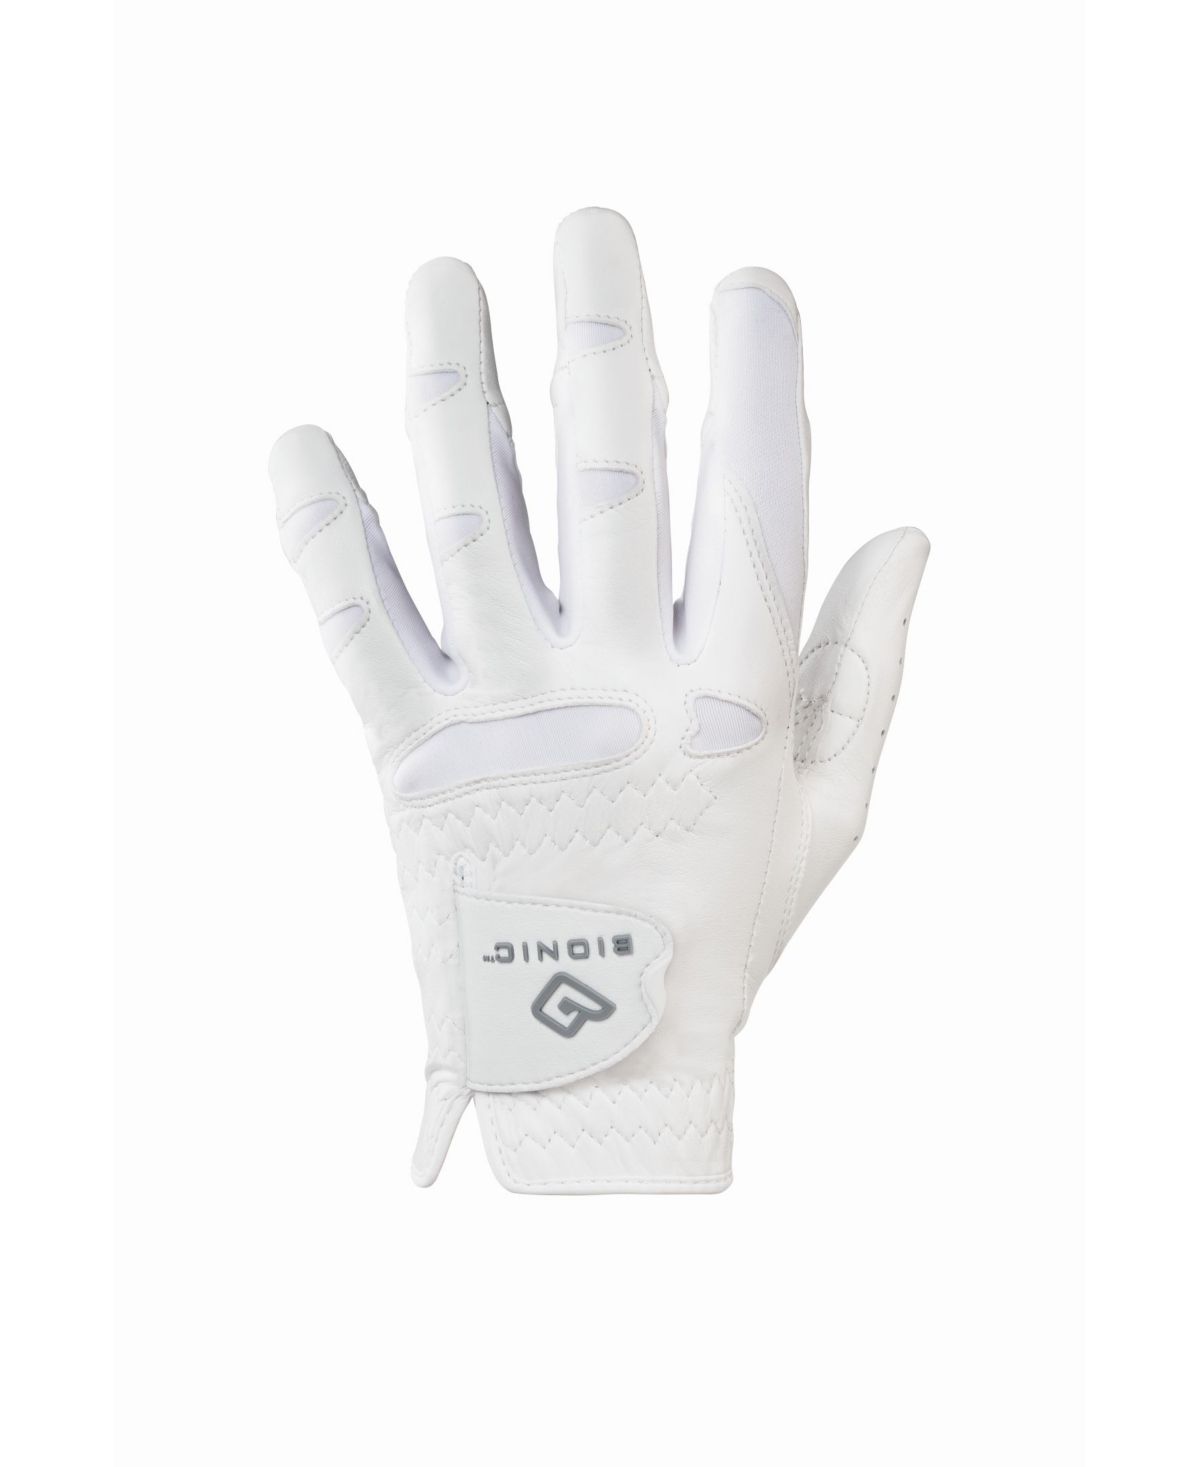 Save 42% on Women's Natural Fit Golf Glove - Left Hand